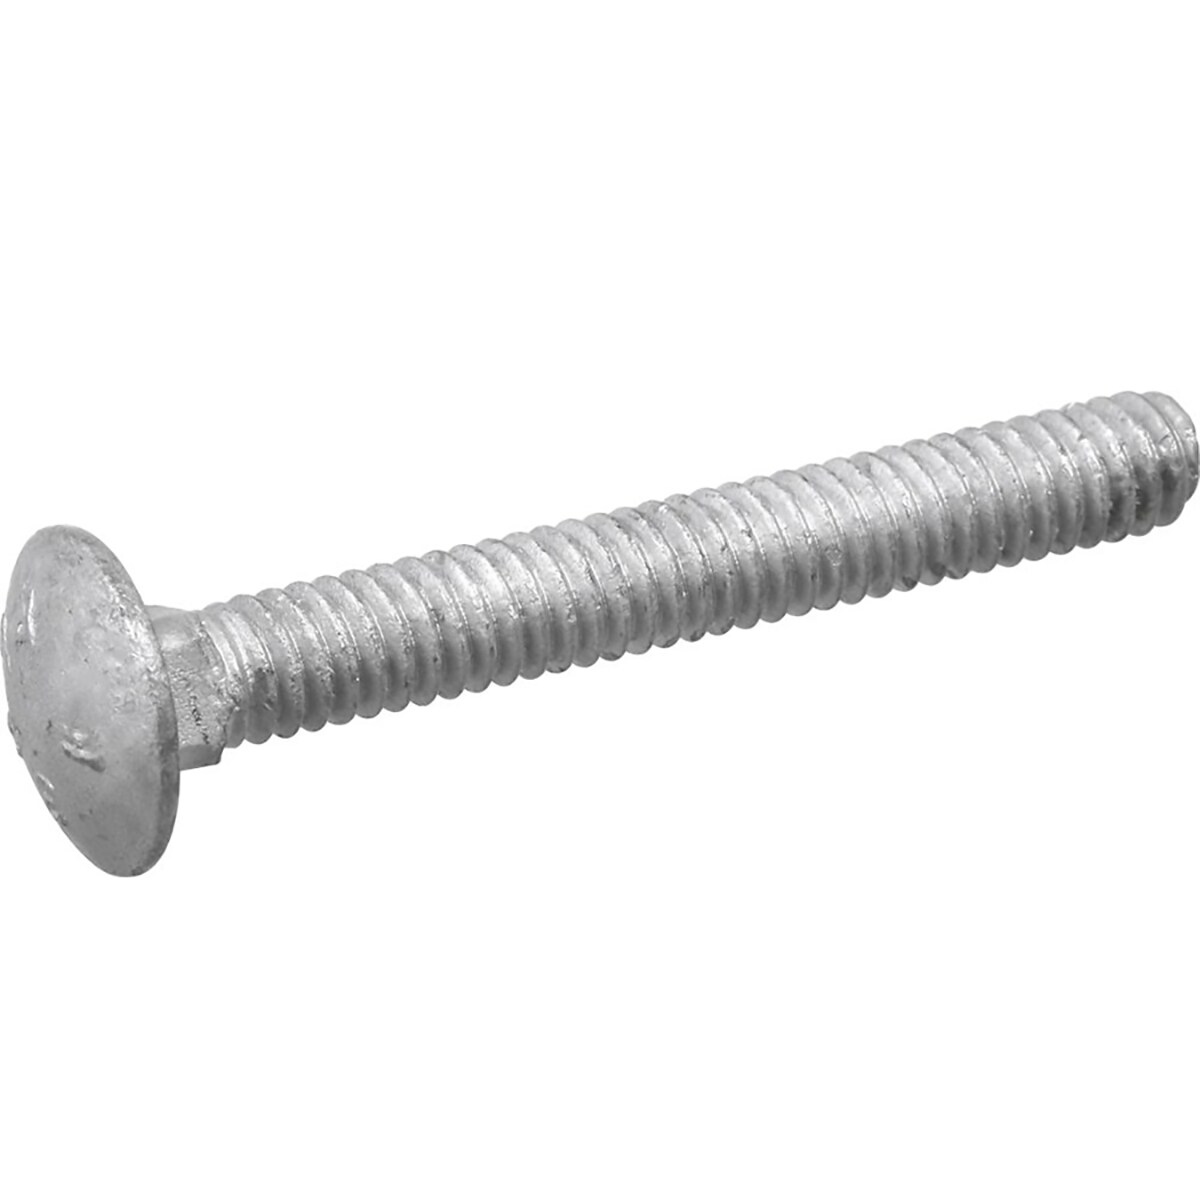 5/16 in-18 X 3 in Prime-Line 9063096 Carriage Bolt Galvanized Steel Pack of 25 